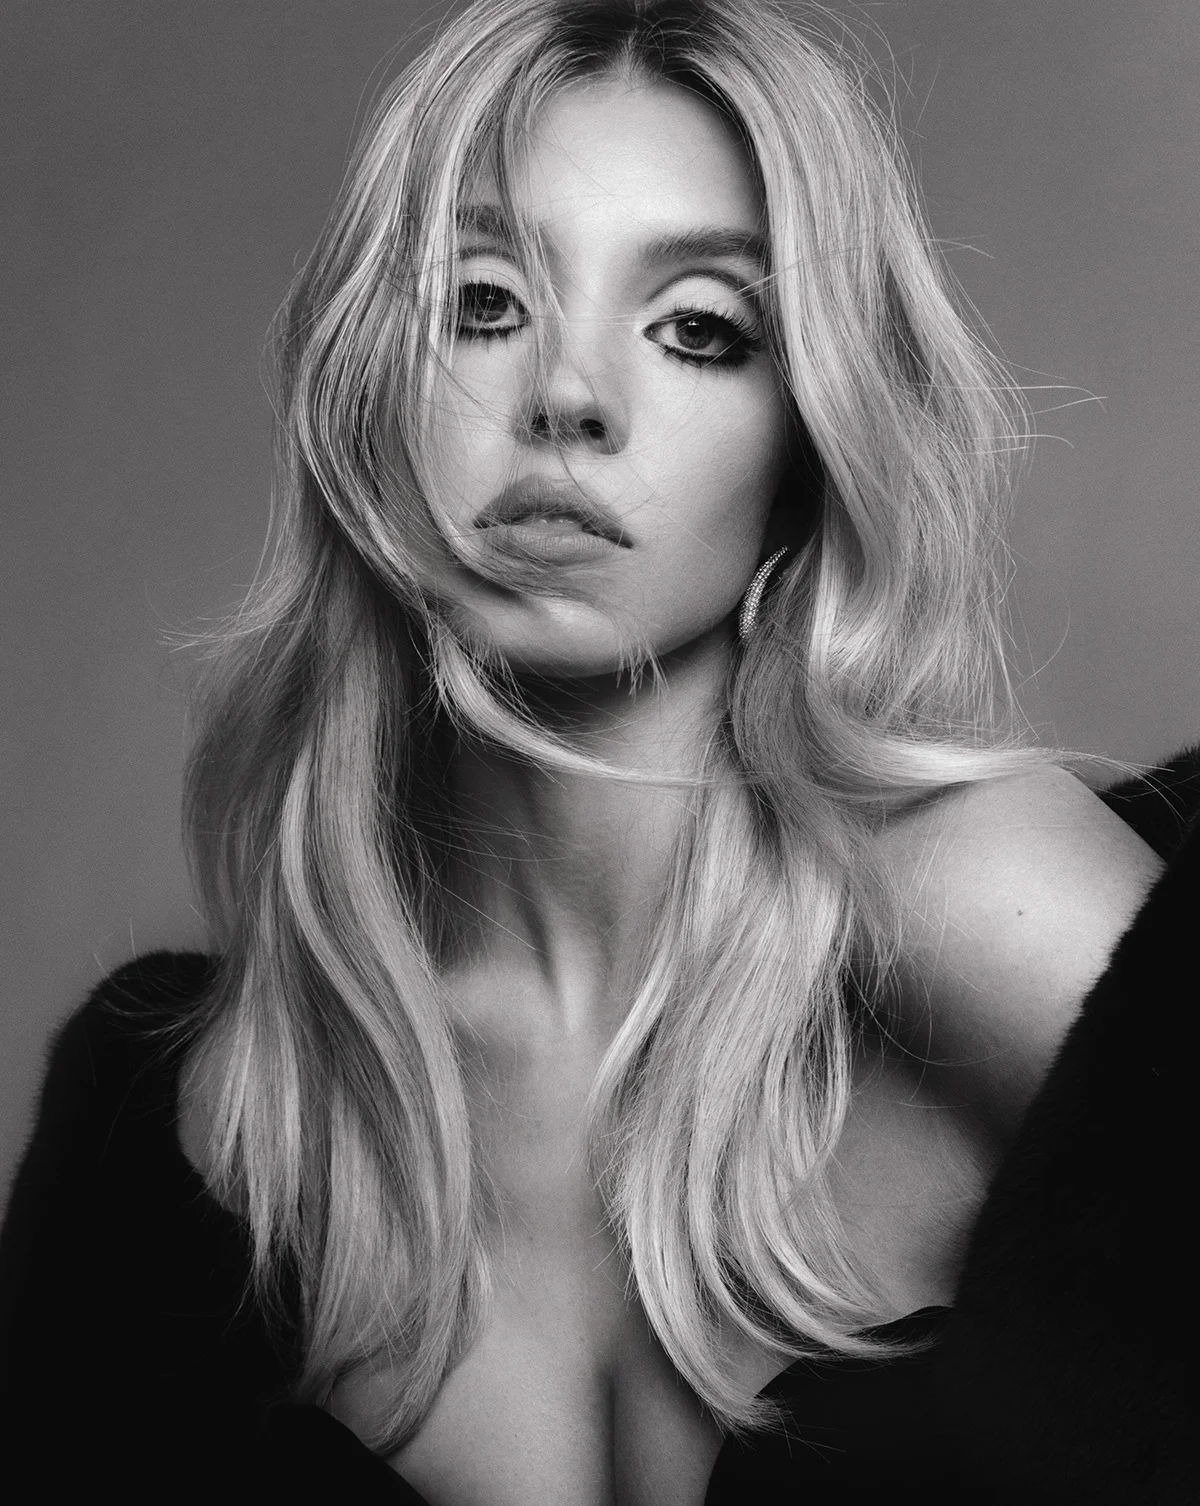 Sydney Sweeney covers Madame Figaro April 8th, 2022 by Elias Tahan